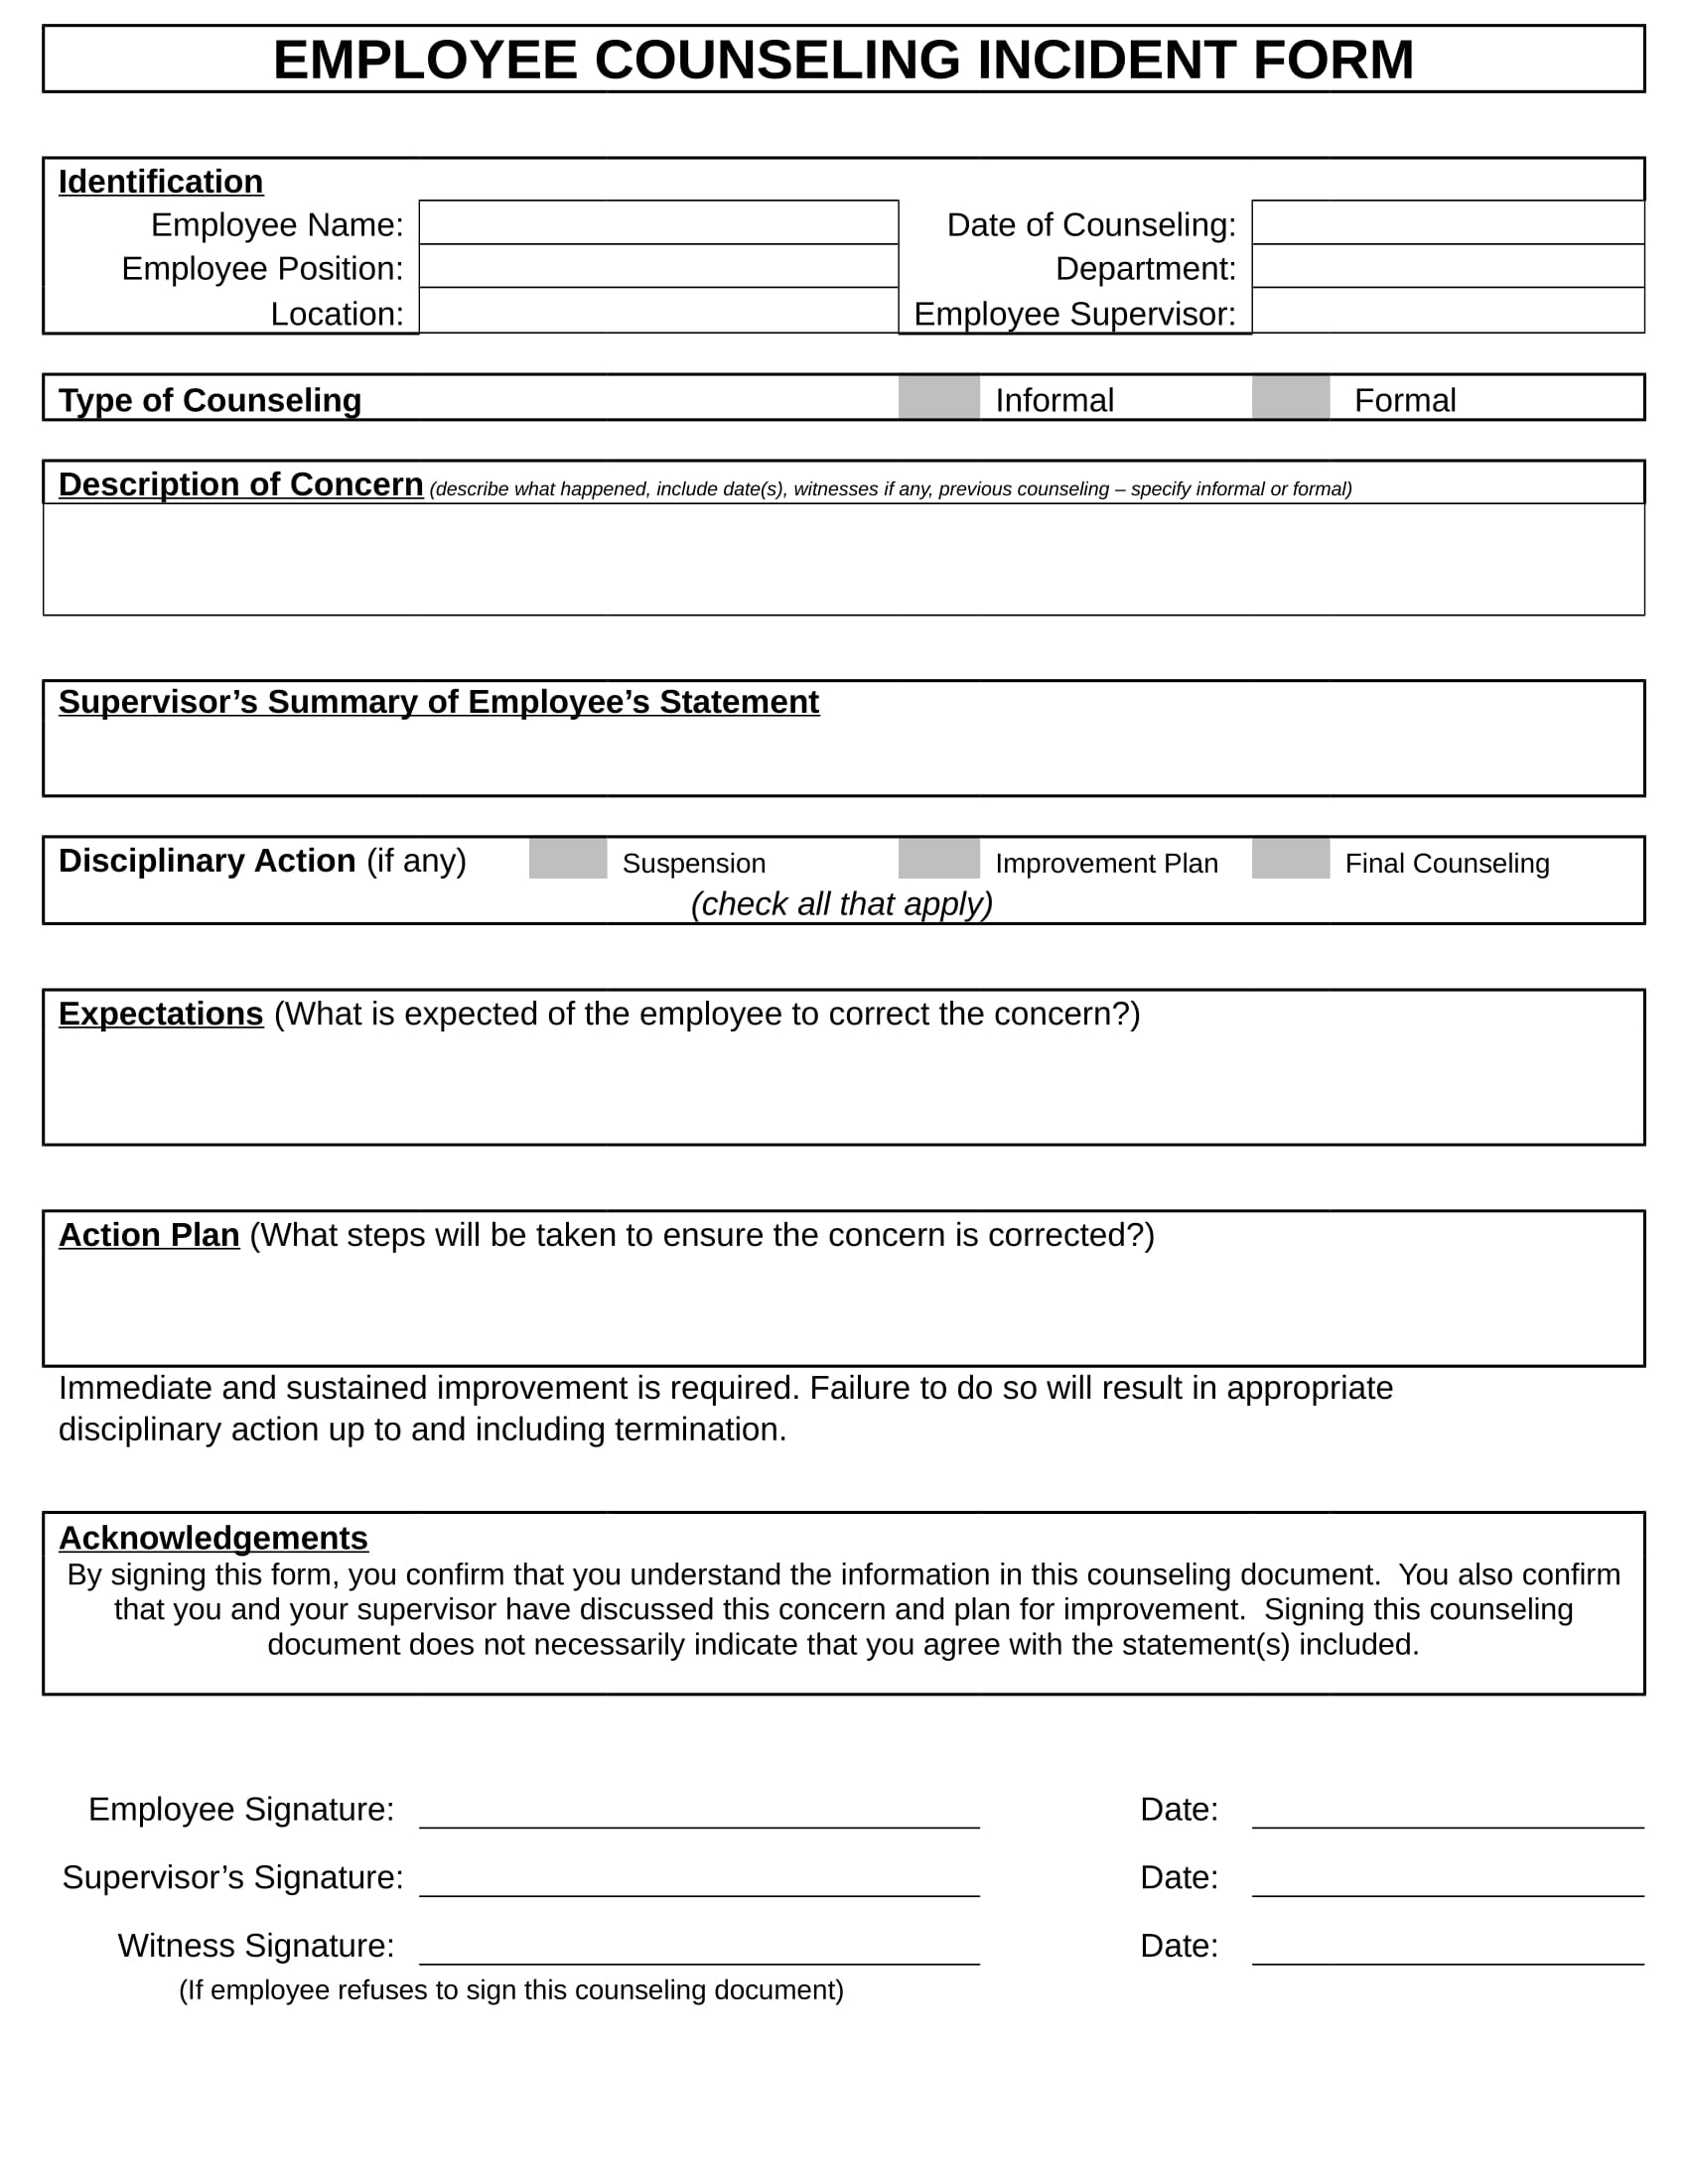 employee counseling incident statement form 1